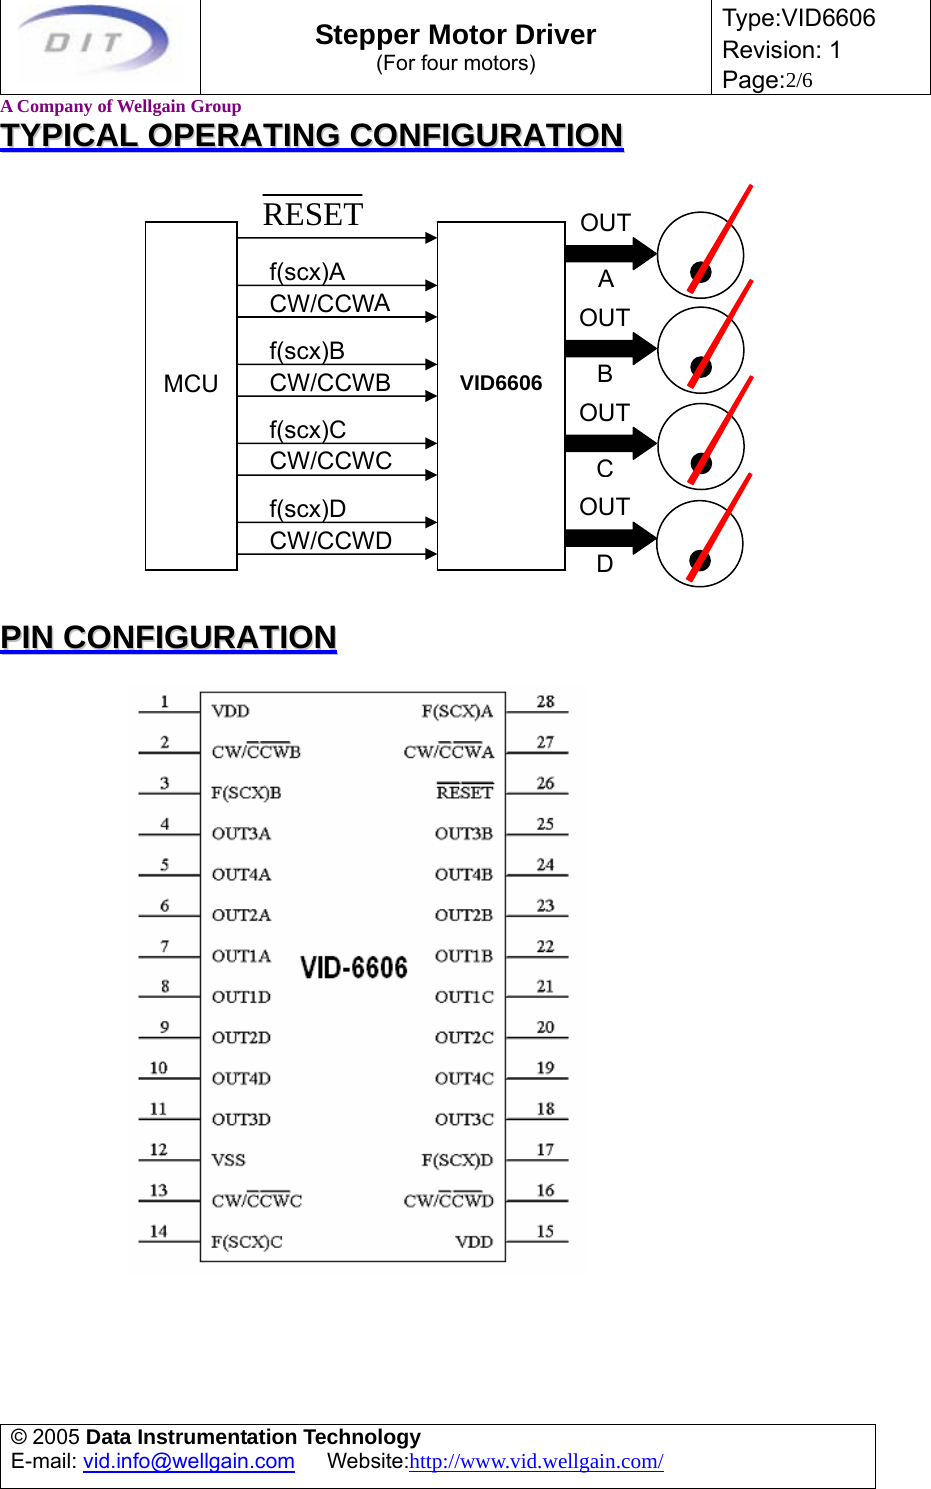 Page 2 of 6 - VID6606 Manual 060809 Stepper Motor Driver